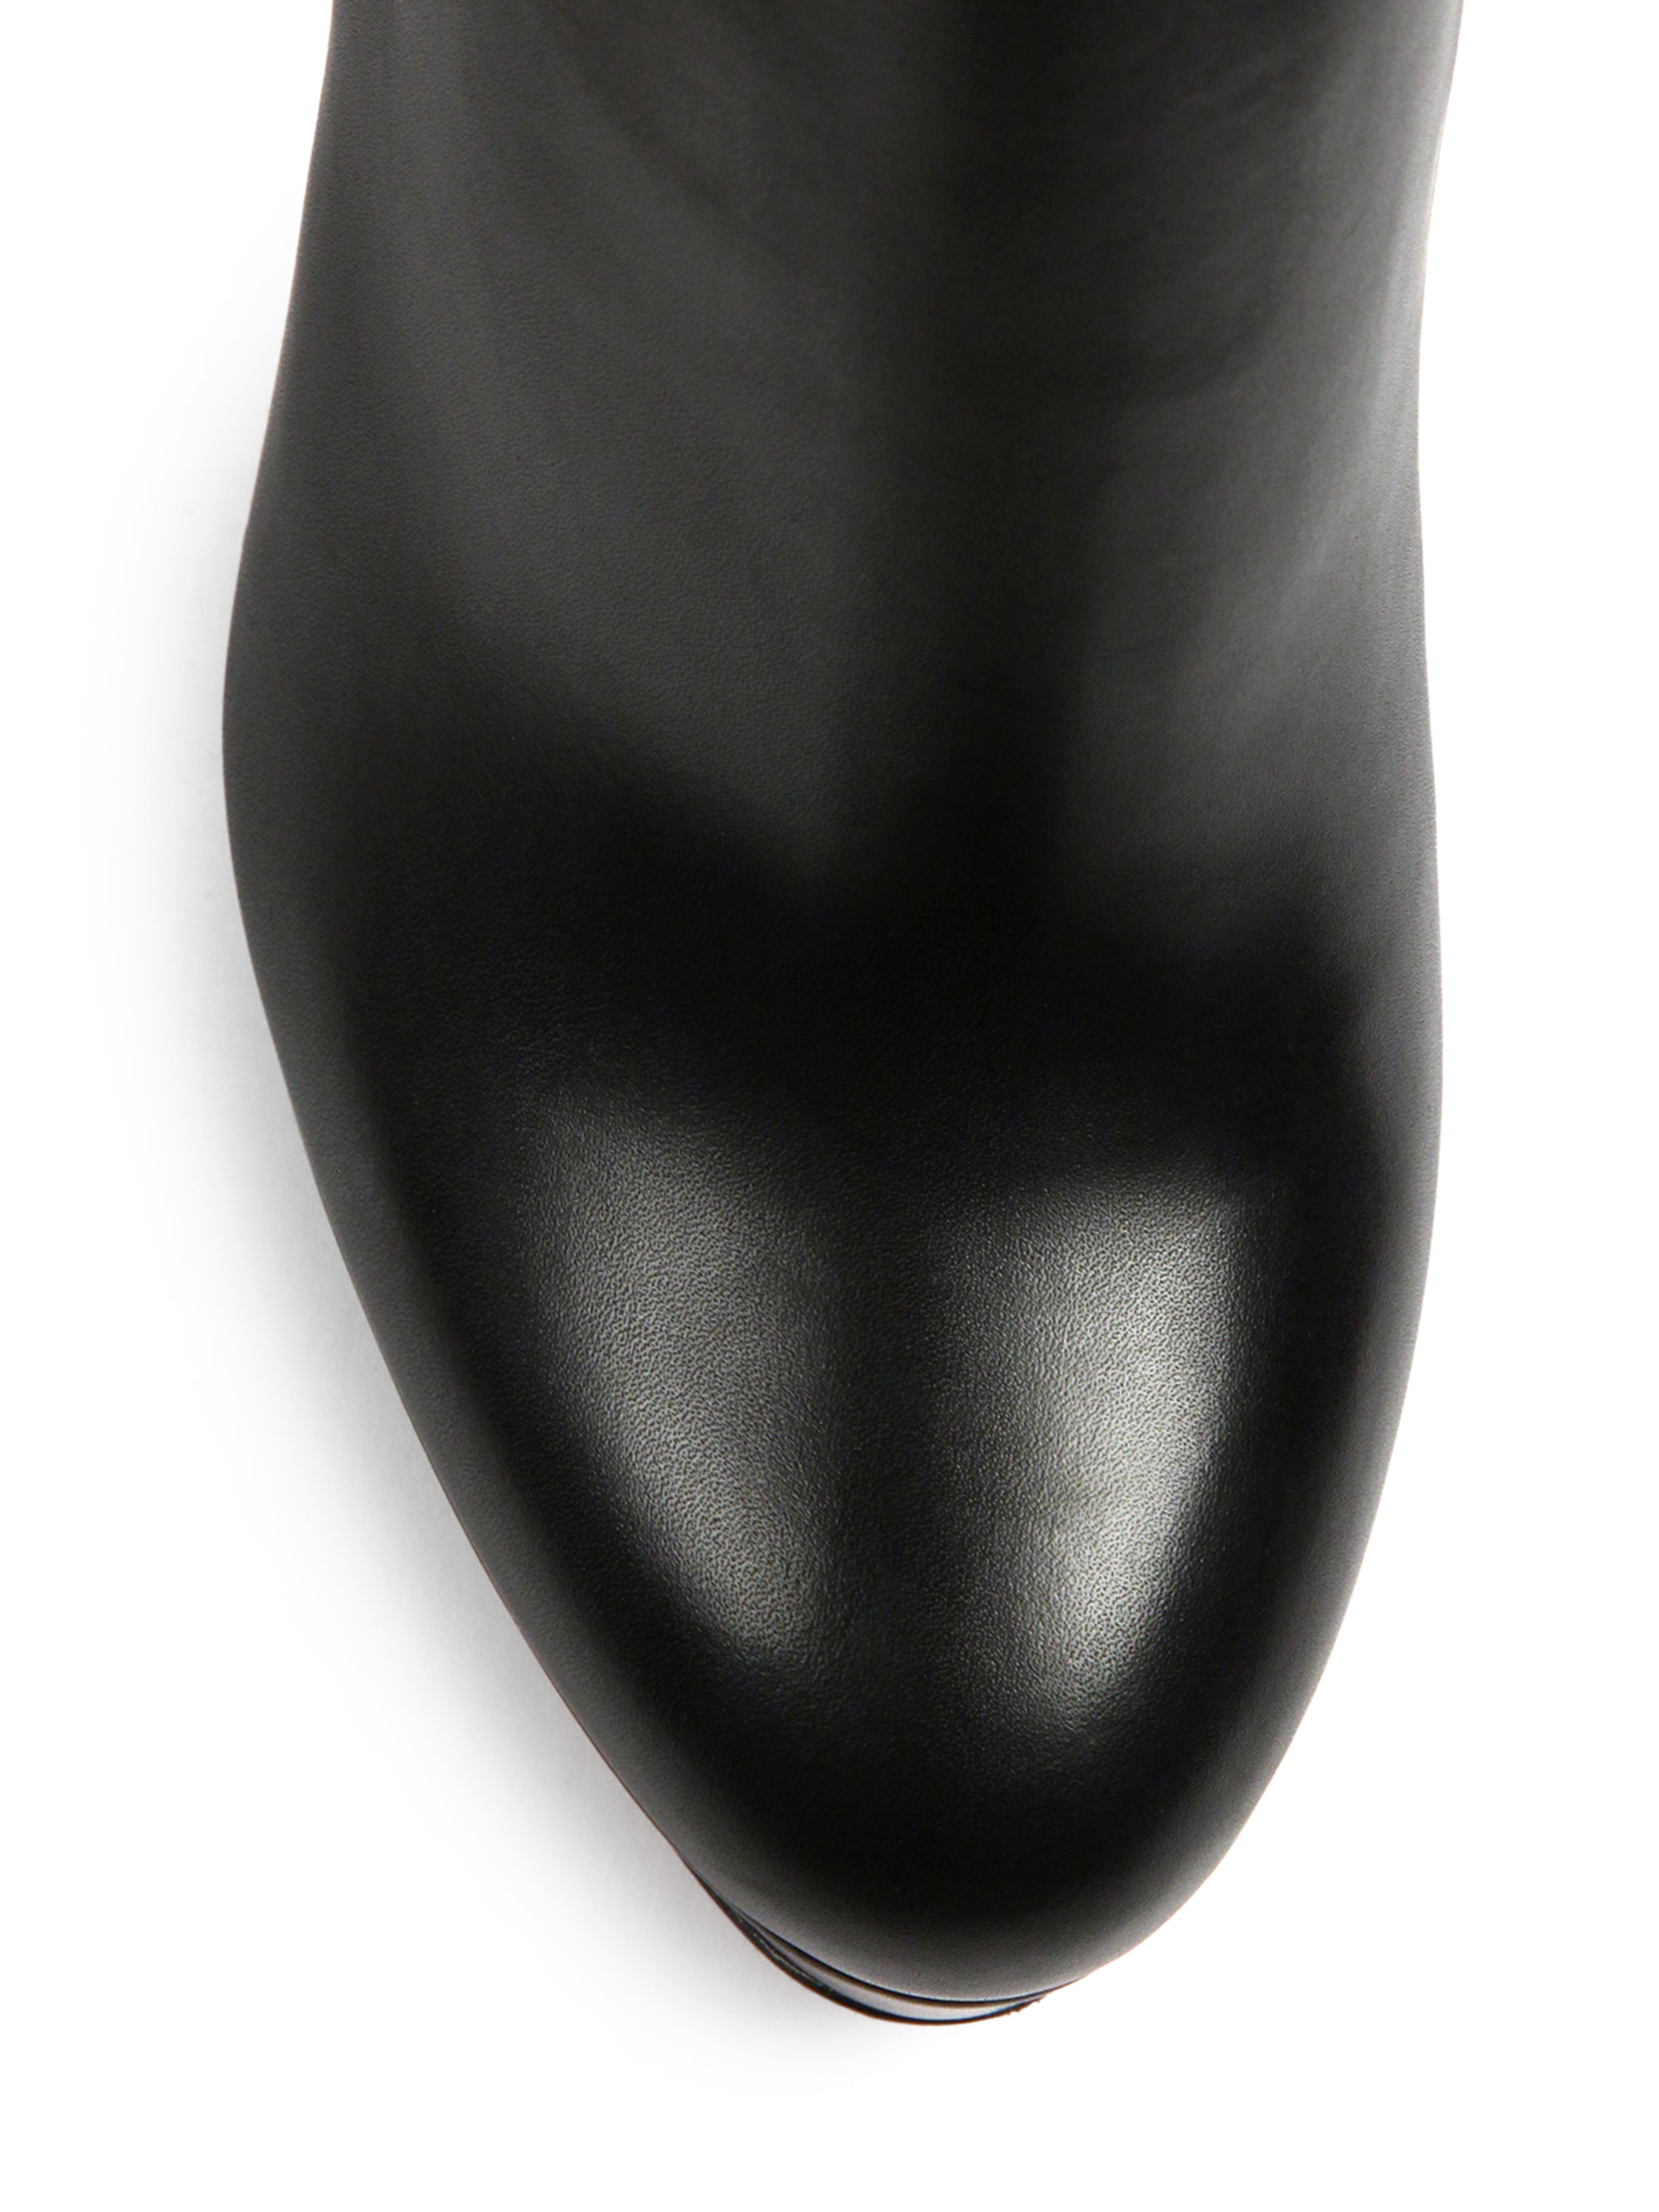 christian-louboutin-black-bianca-leather-knee-high-boots-product-2-356497022-normal.jpeg